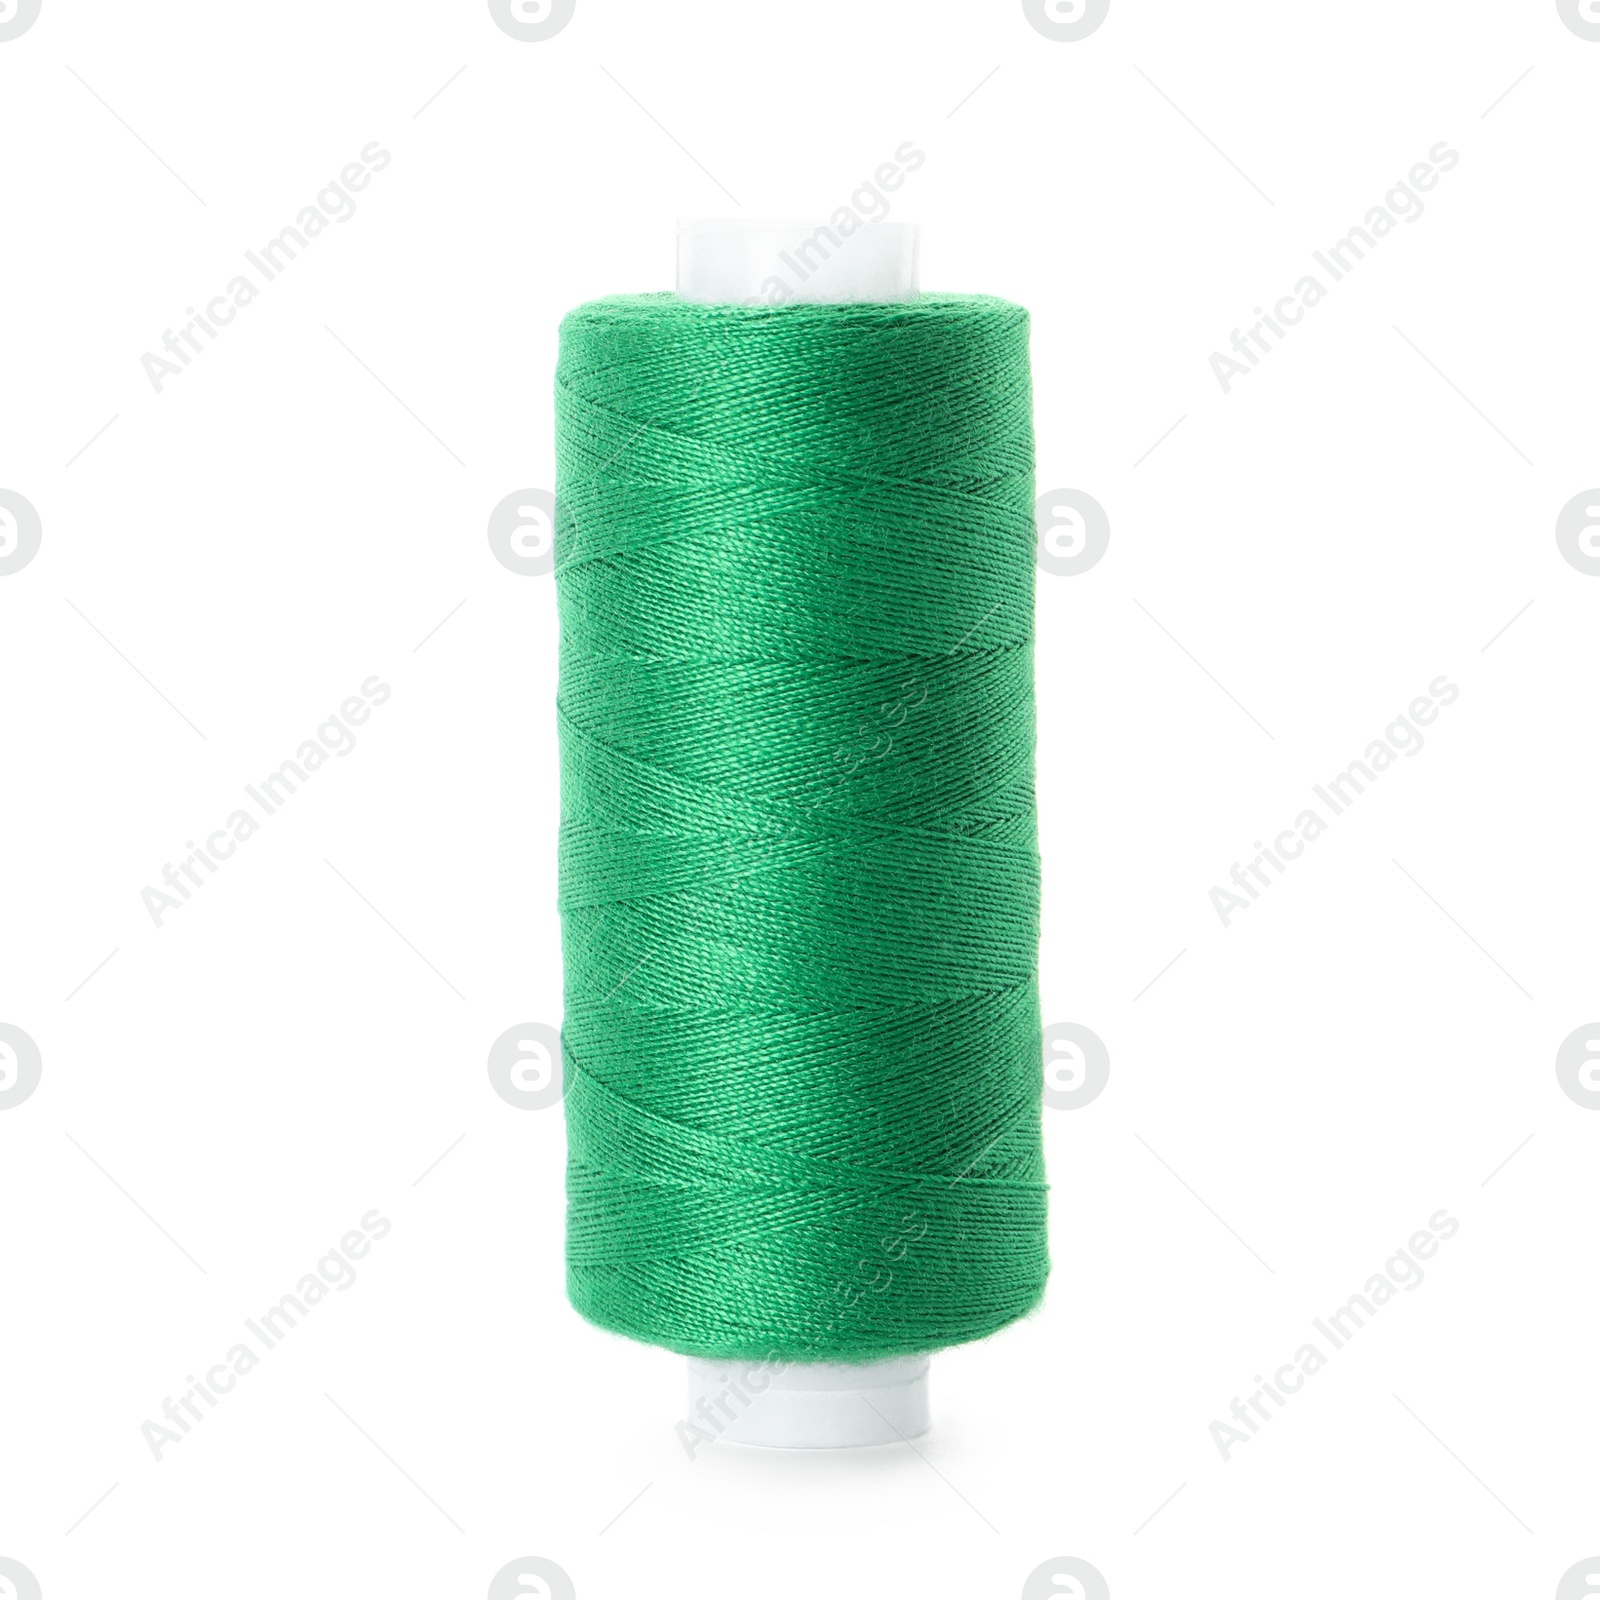 Photo of Spool of green sewing thread isolated on white